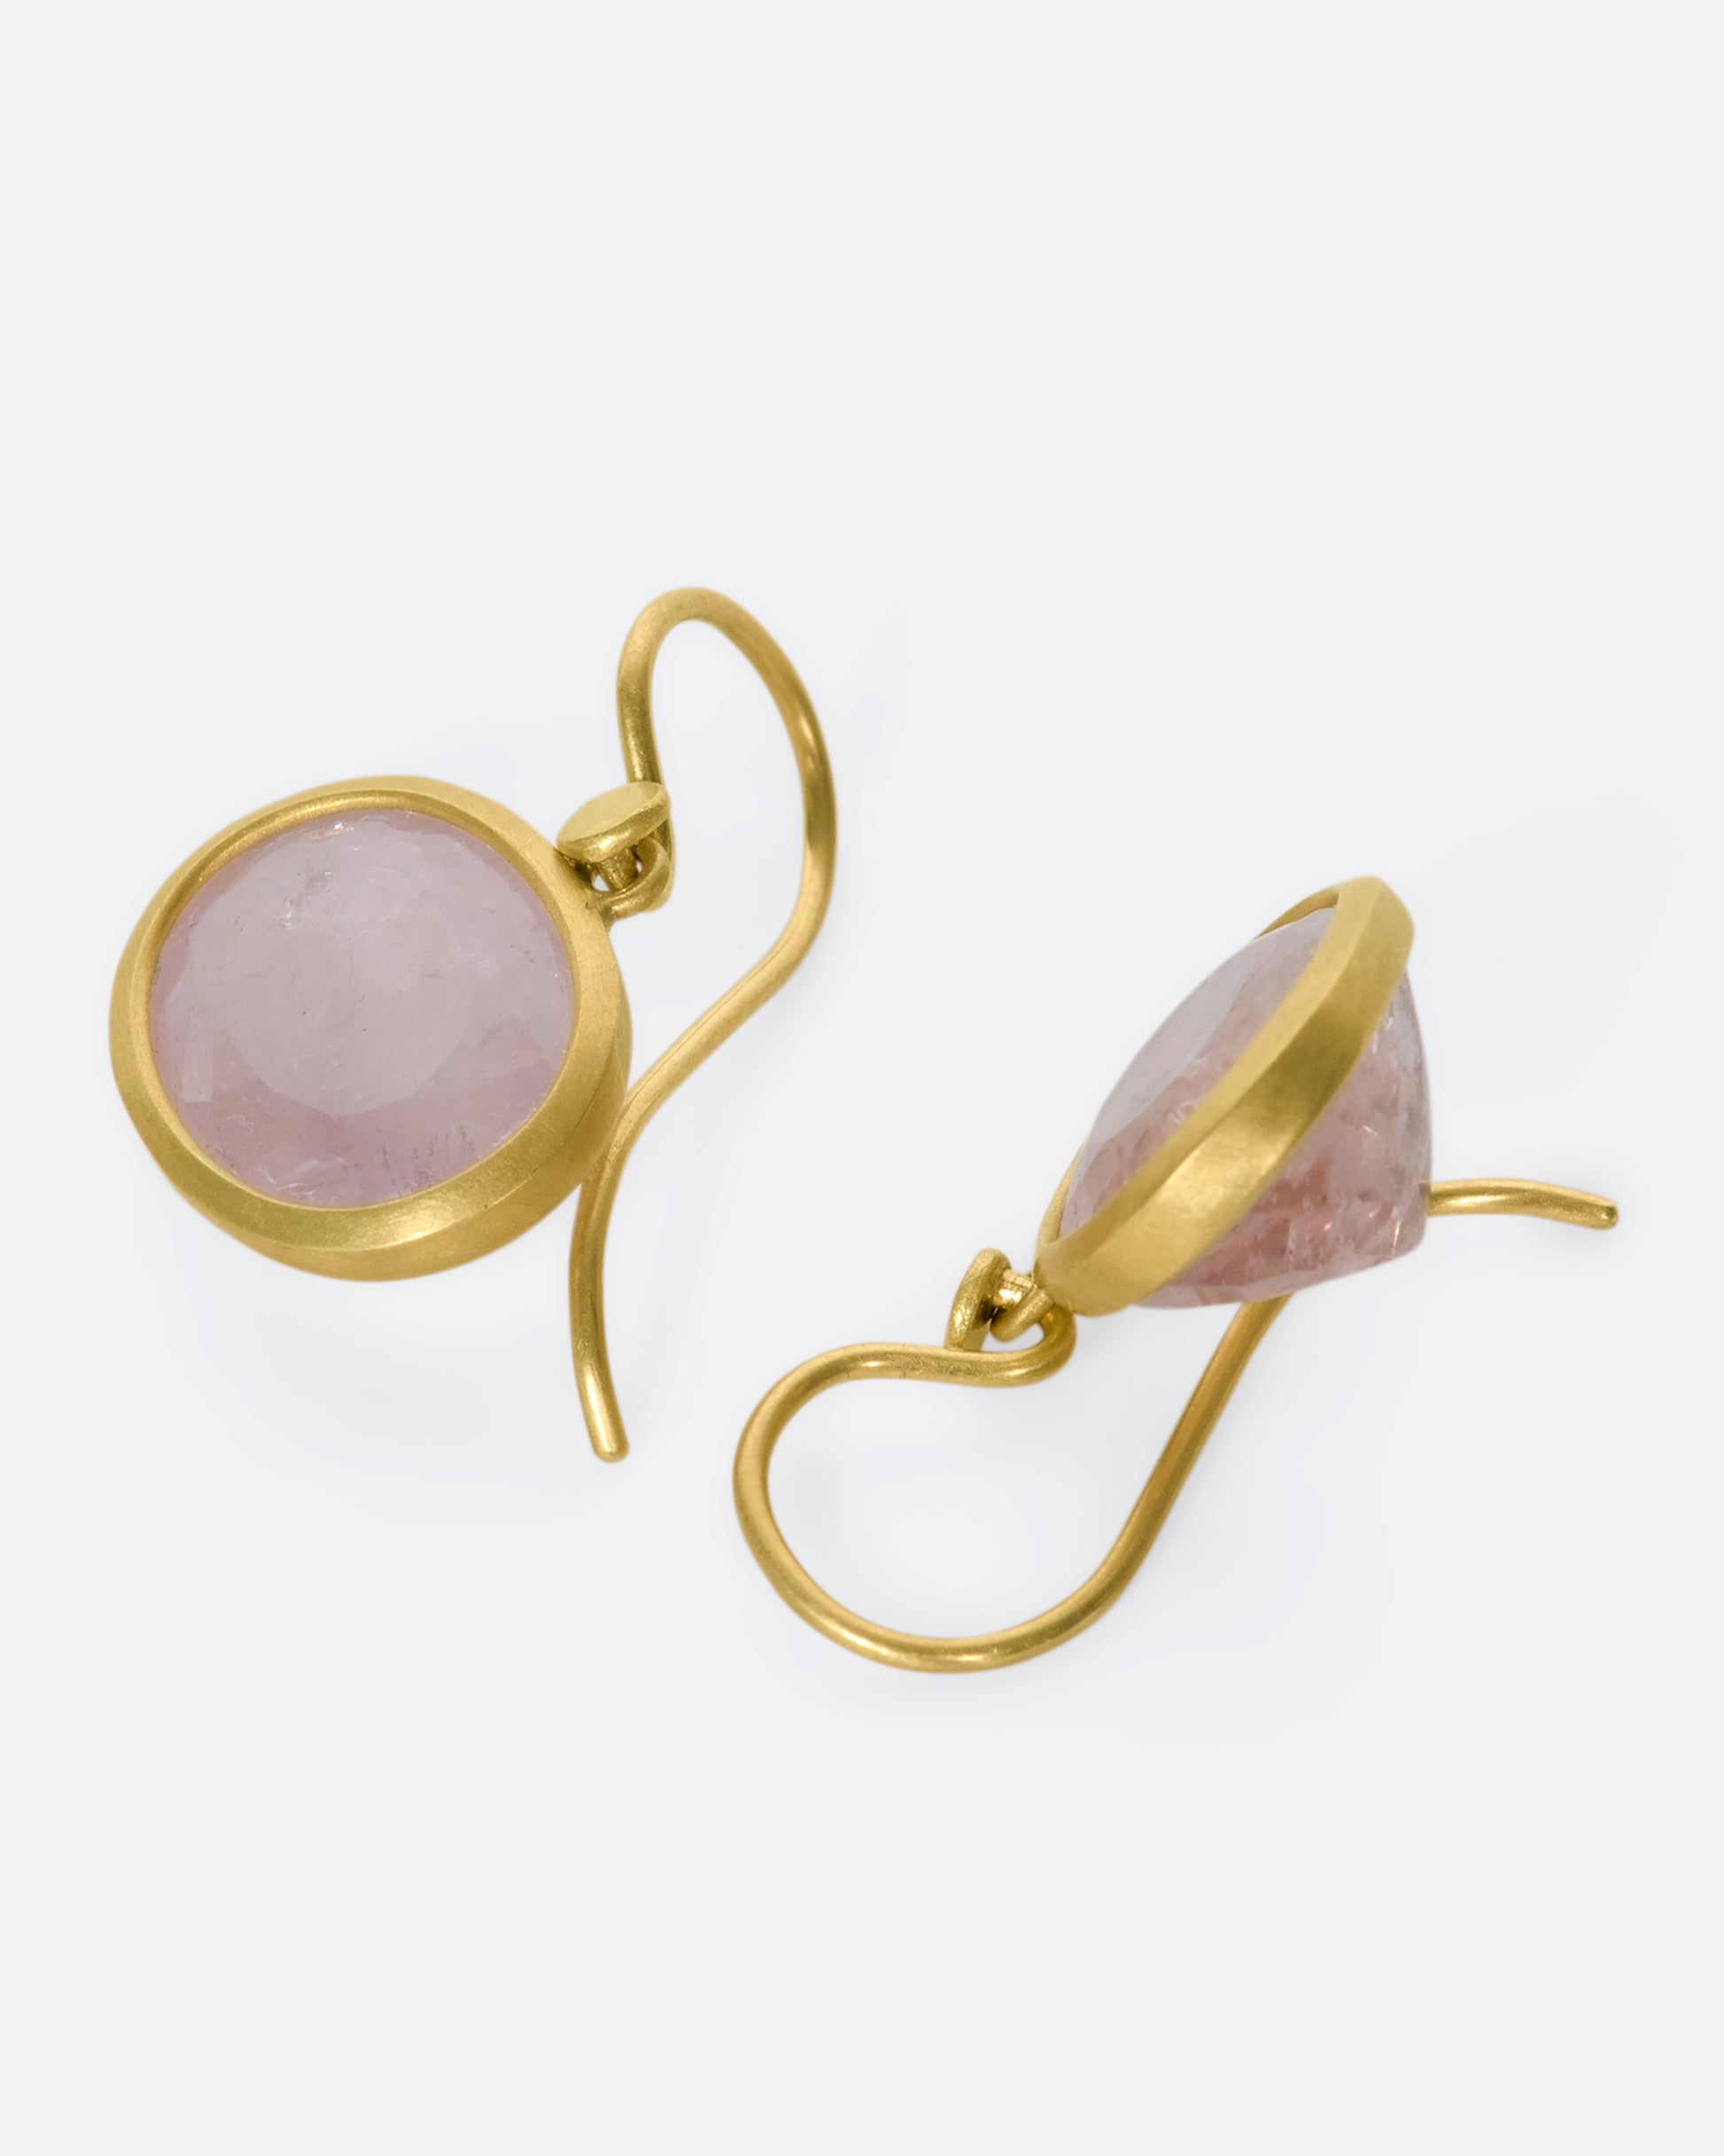 A pair of oval morganite drop earrings with yellow gold bezels and hooks lying down.